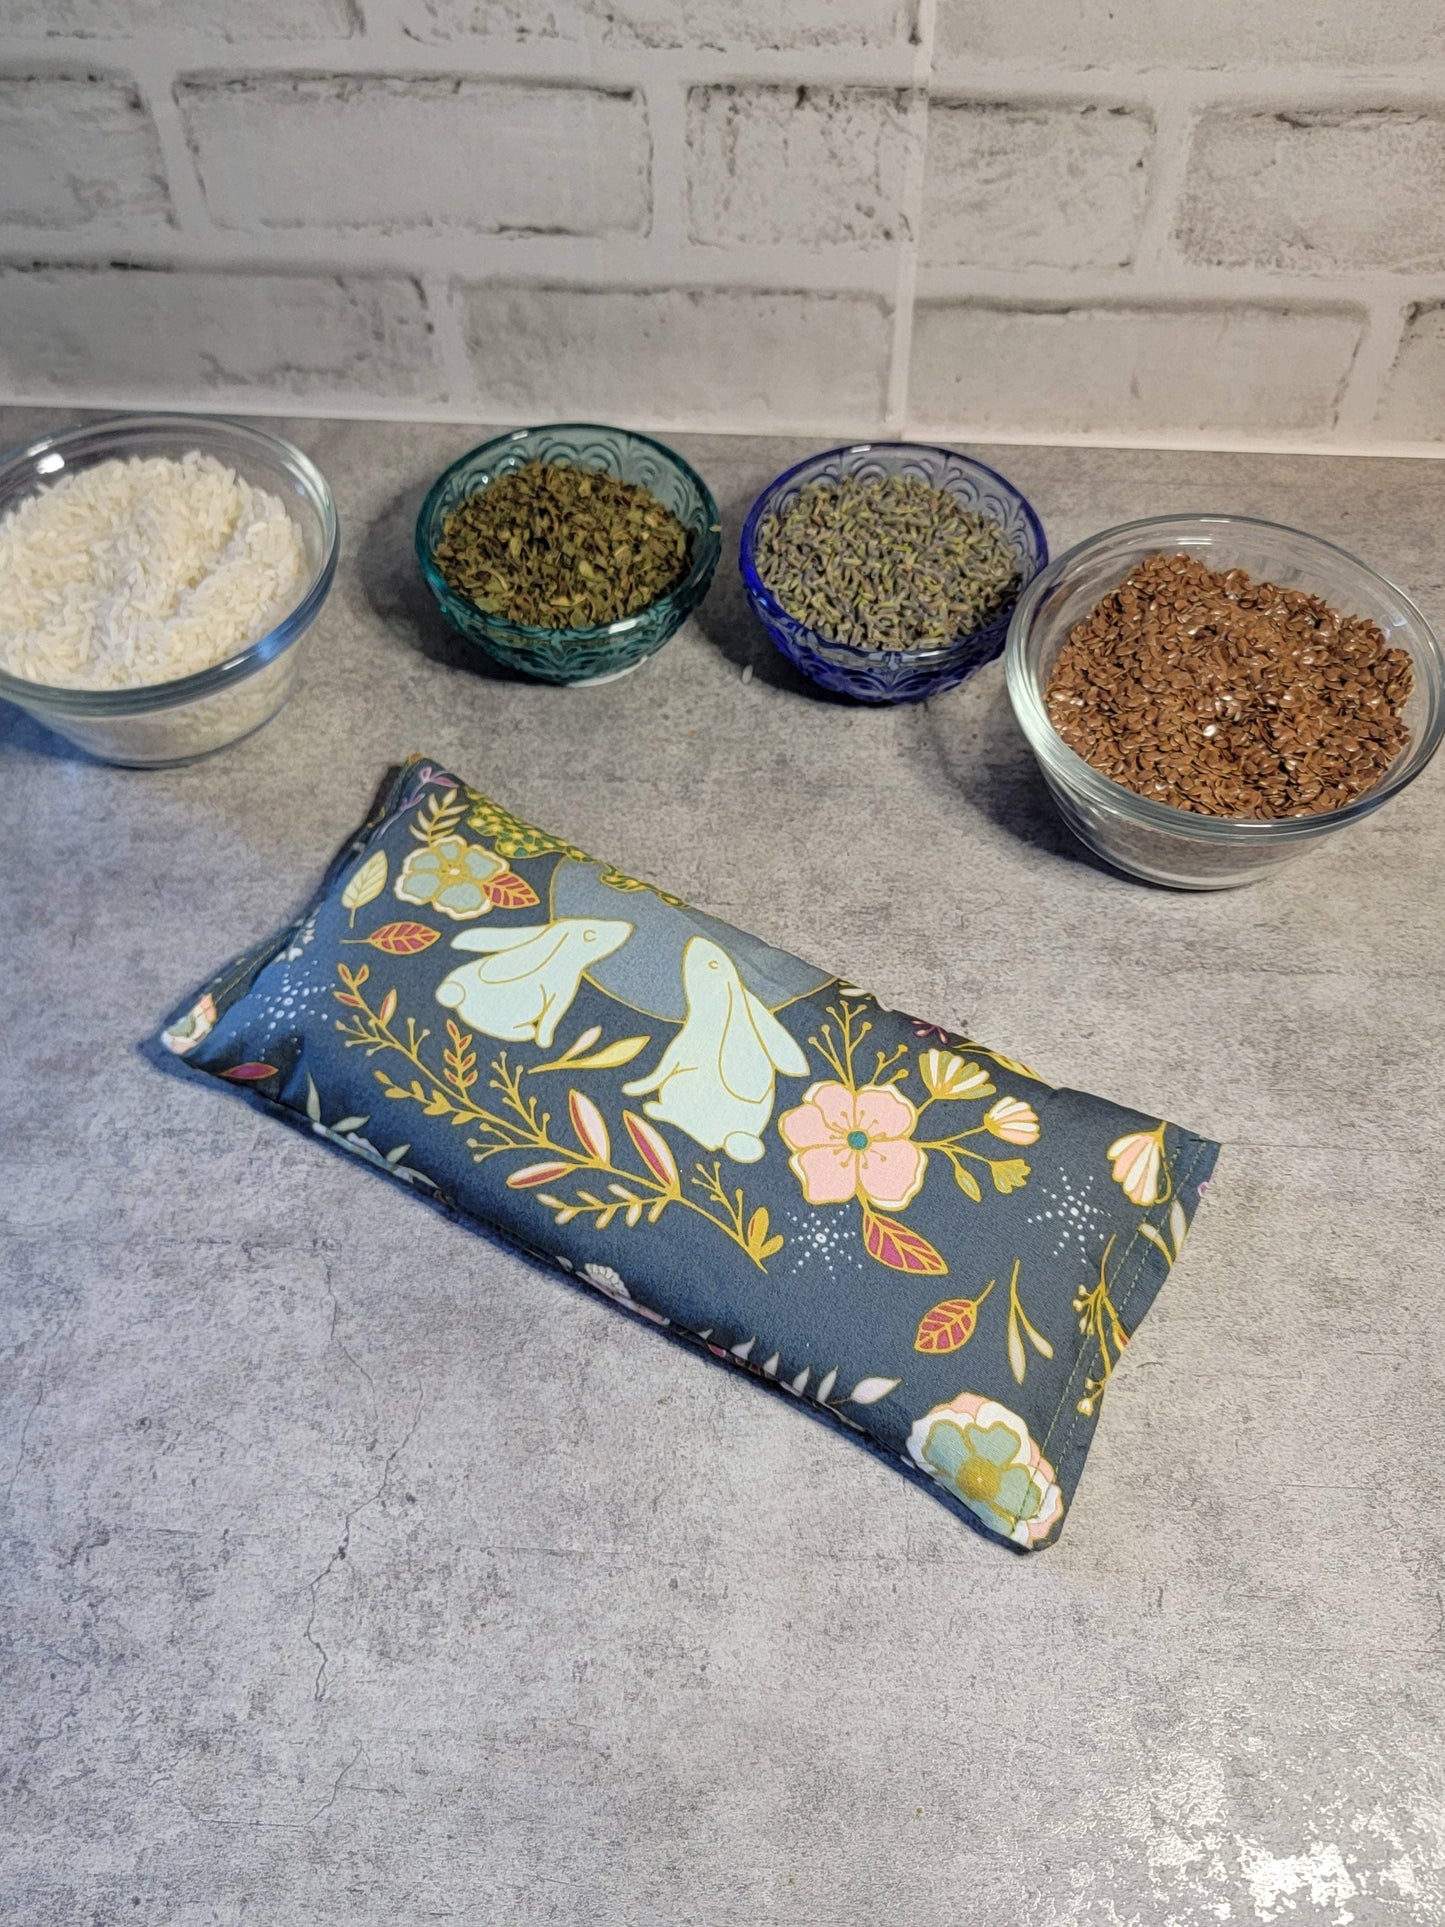 Aromatherapy Hot/Cold Weighted Eye Pillow - Soothing Pattern: Lavender and Peppermint / Rice and Flaxseed Mix / Forest Wildflowers